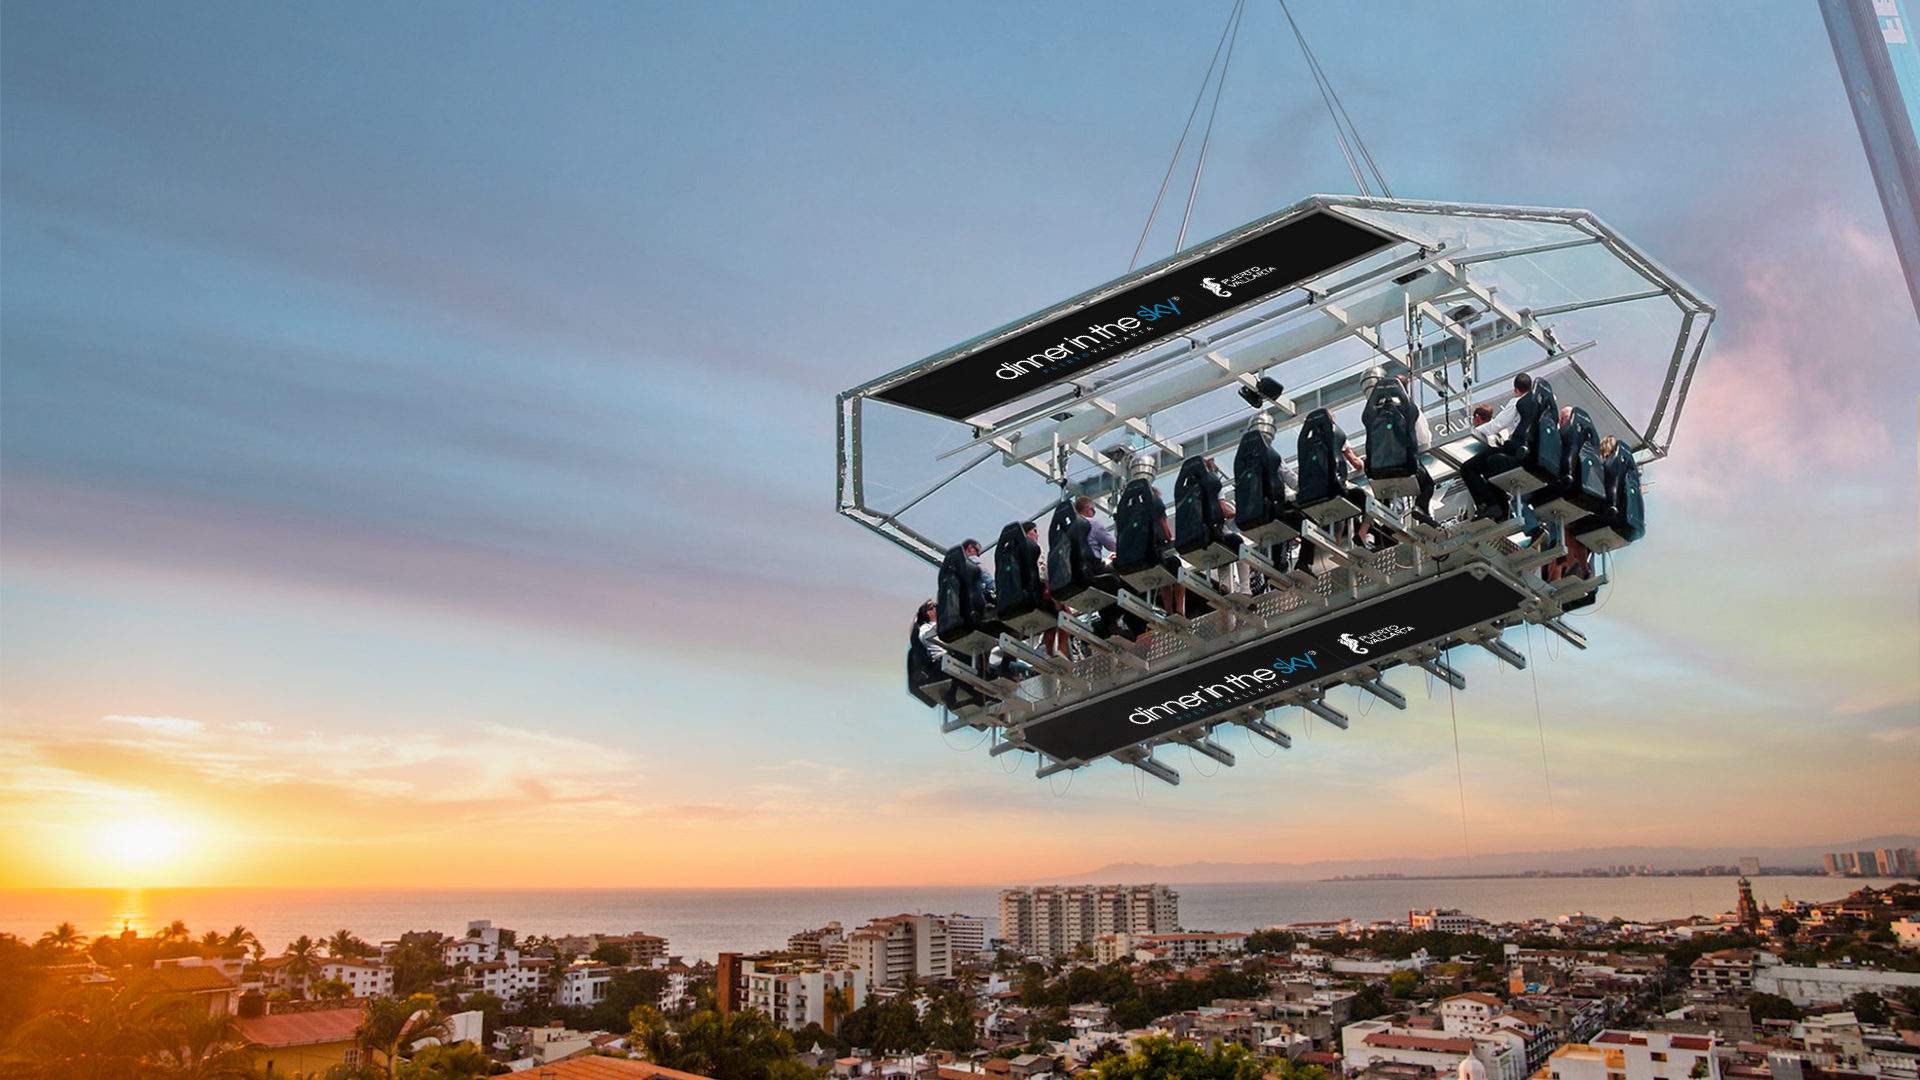 Dine 50 Metres Above Ground at This Dangling Dinner in the Sky